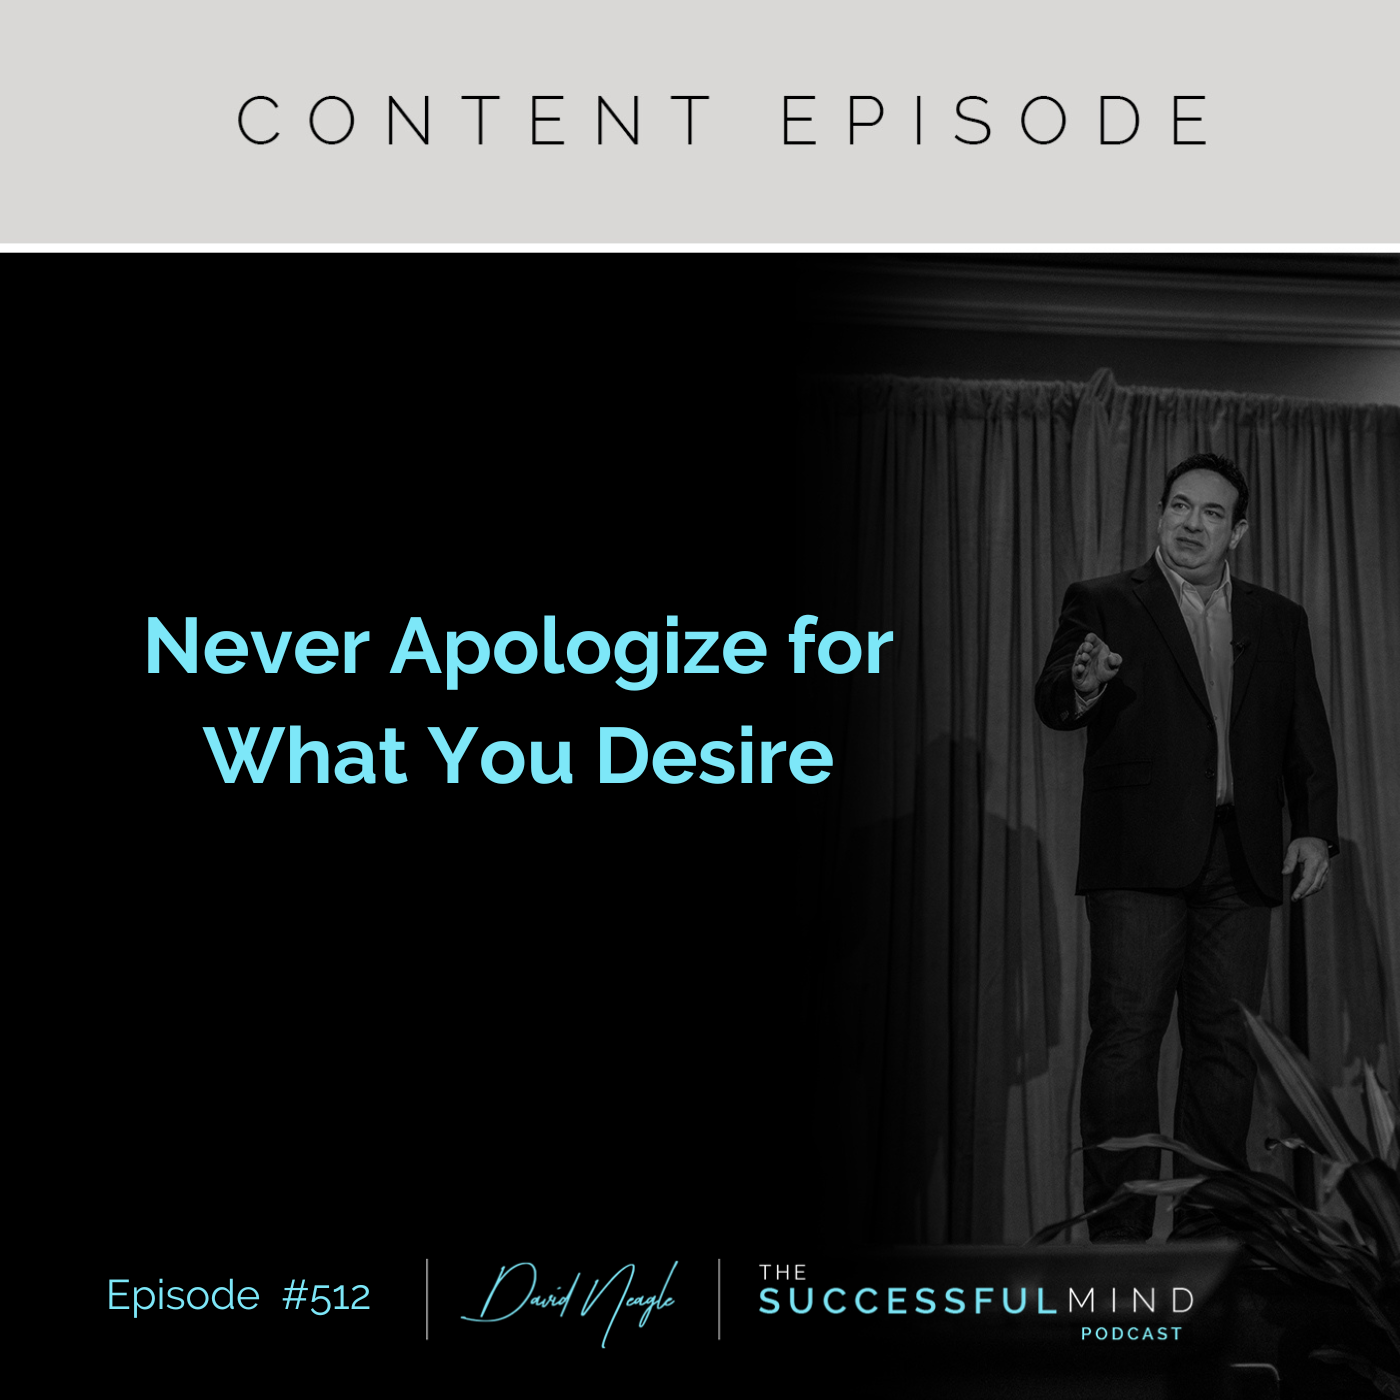 The Successful Mind Podcast - Episode 512 - Never Apologize for What You Desire